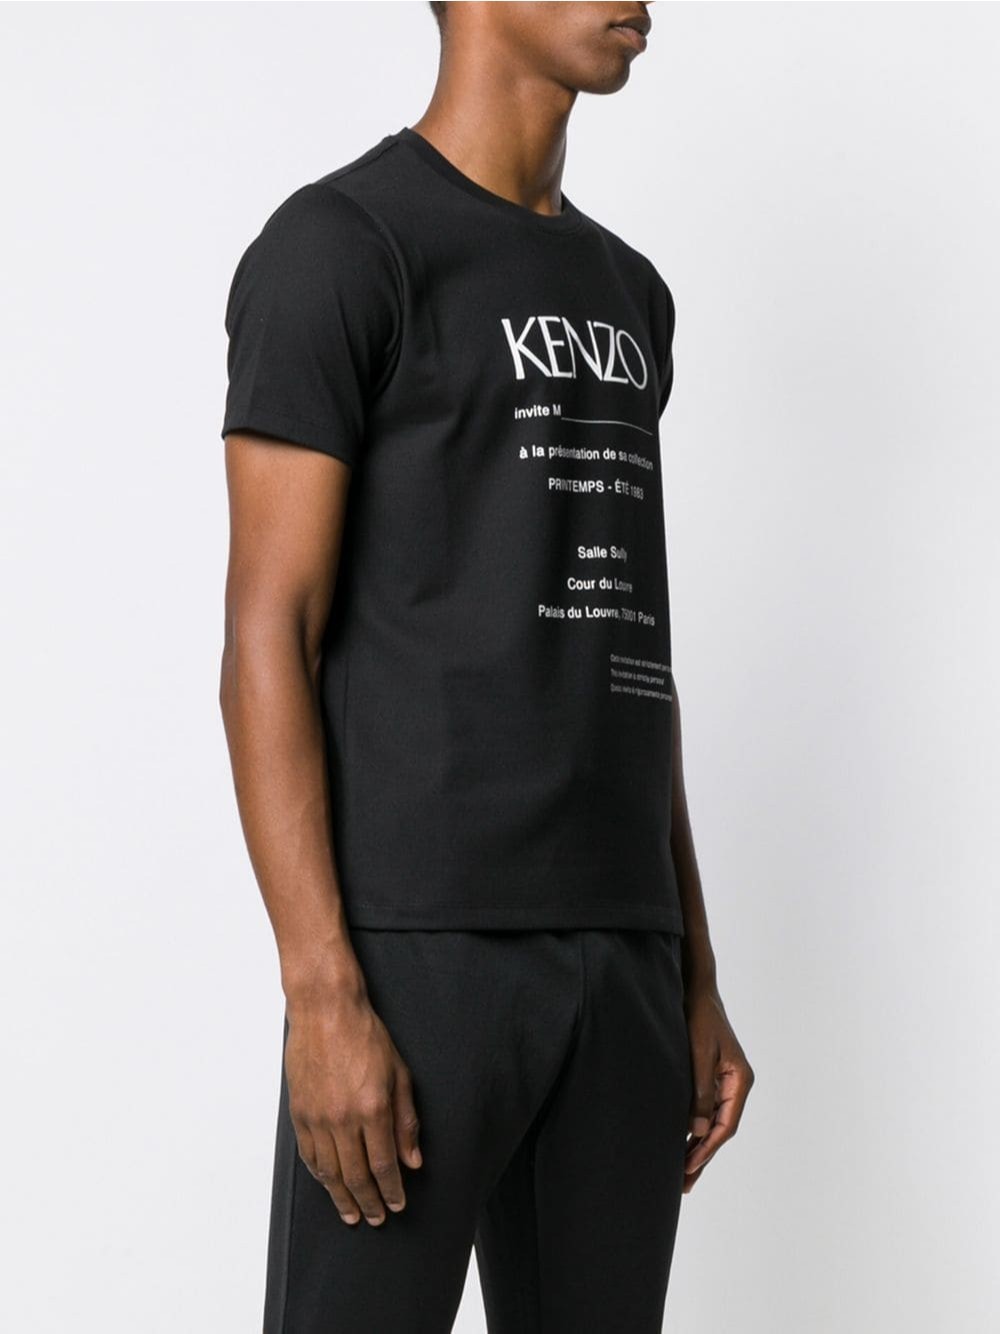 kenzo T-SHIRT available on montiboutique.com - 27844